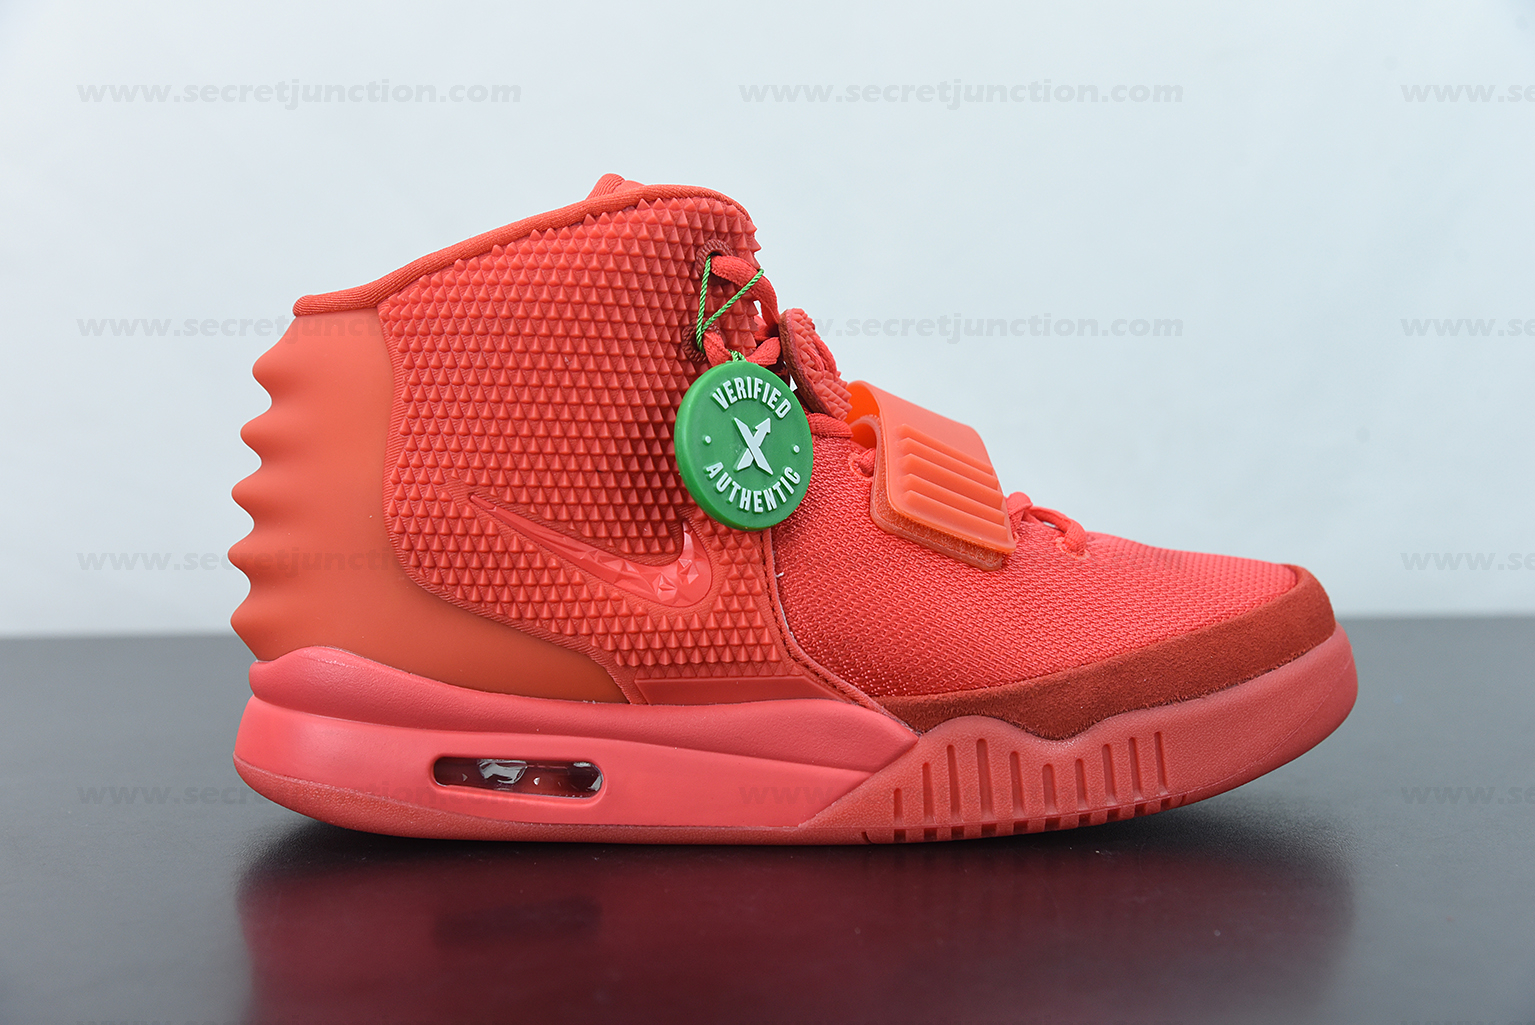 NIKE AIR YEEZY 2 – “RED OCTOBER”